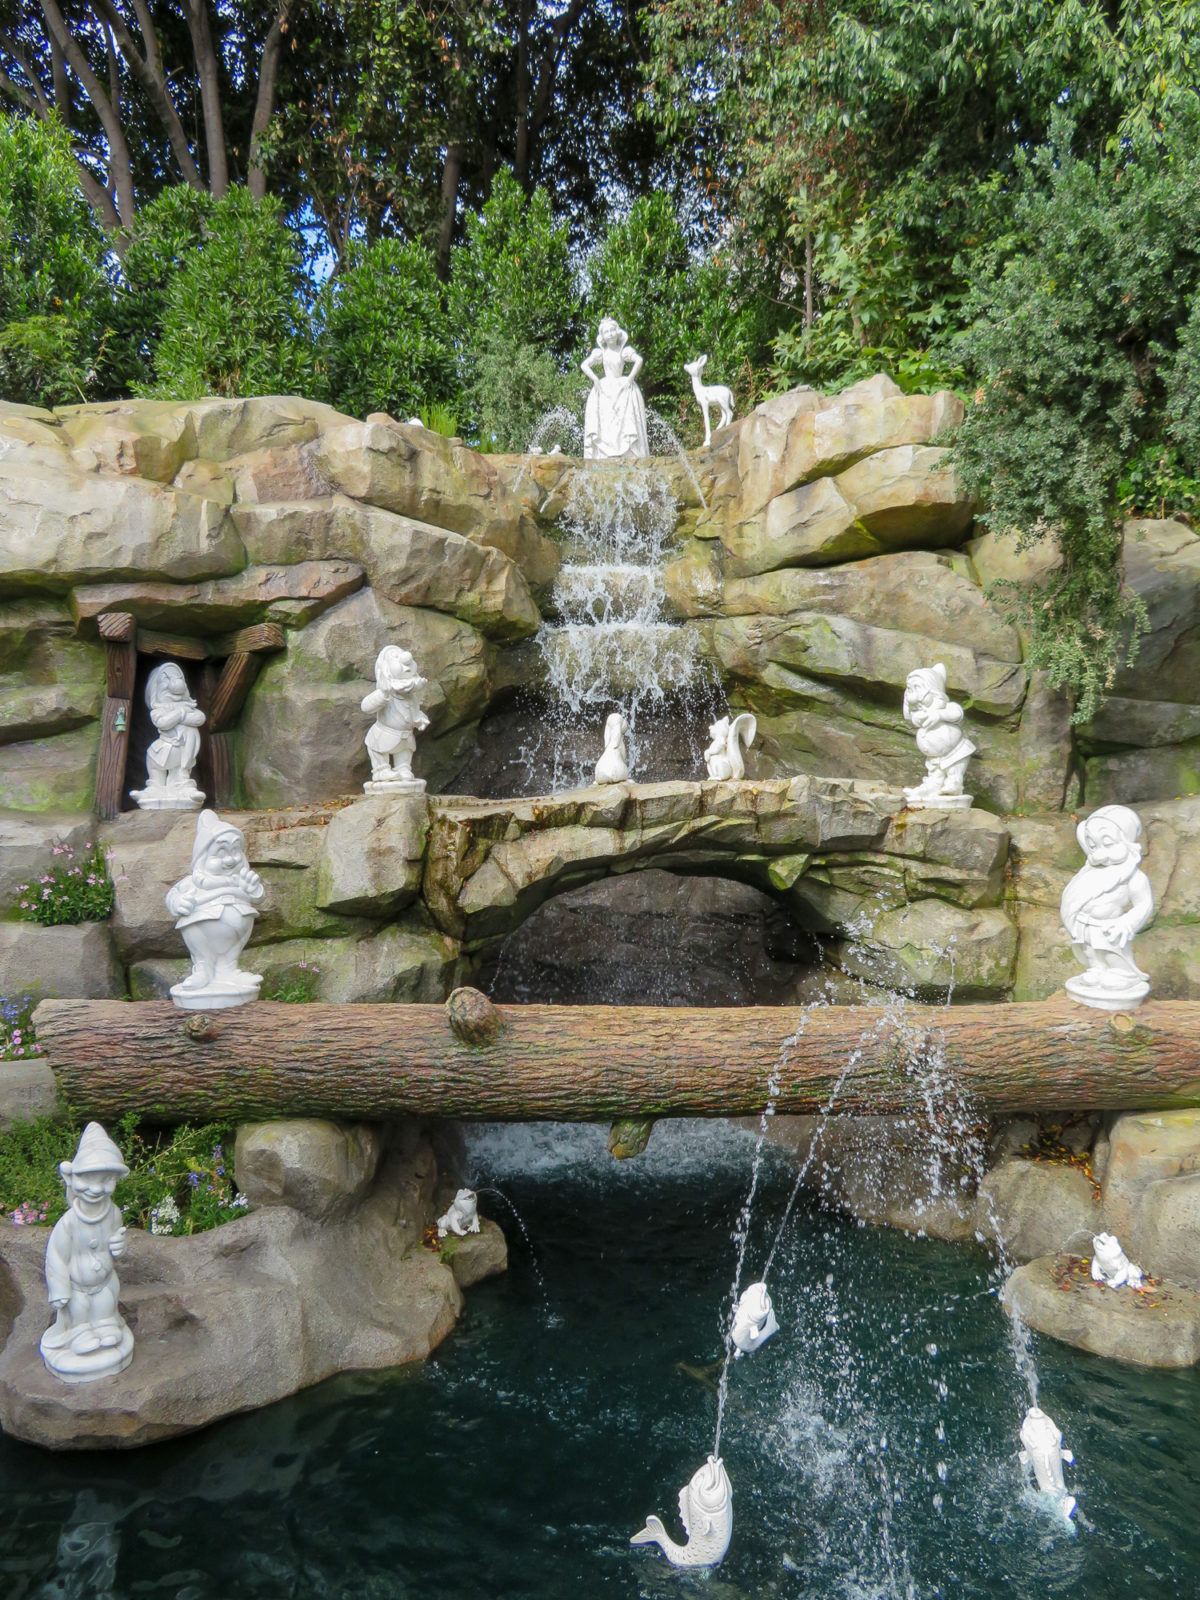 Snow White Grotto, a romantic place for couples at Disneyland